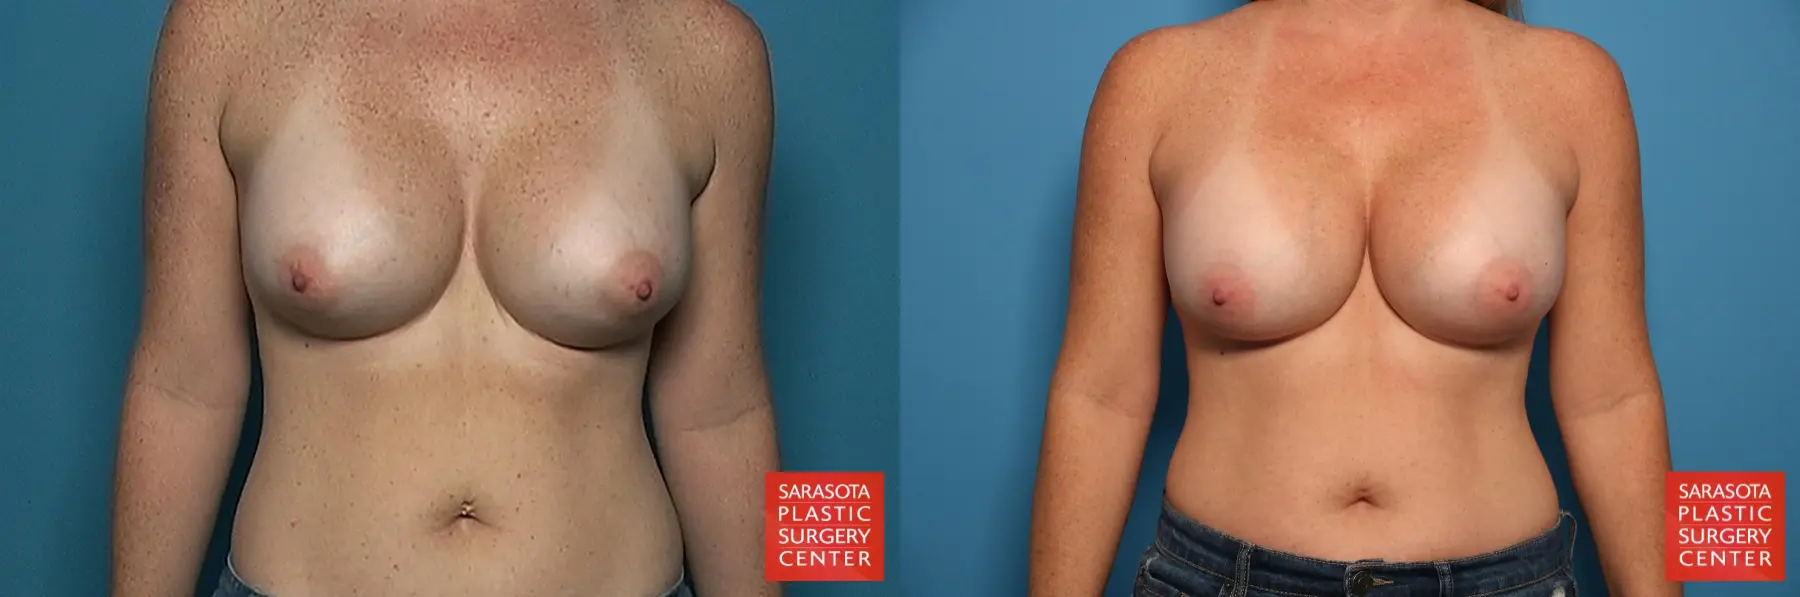 Breast Implant Exchange: Patient 3 - Before and After 1